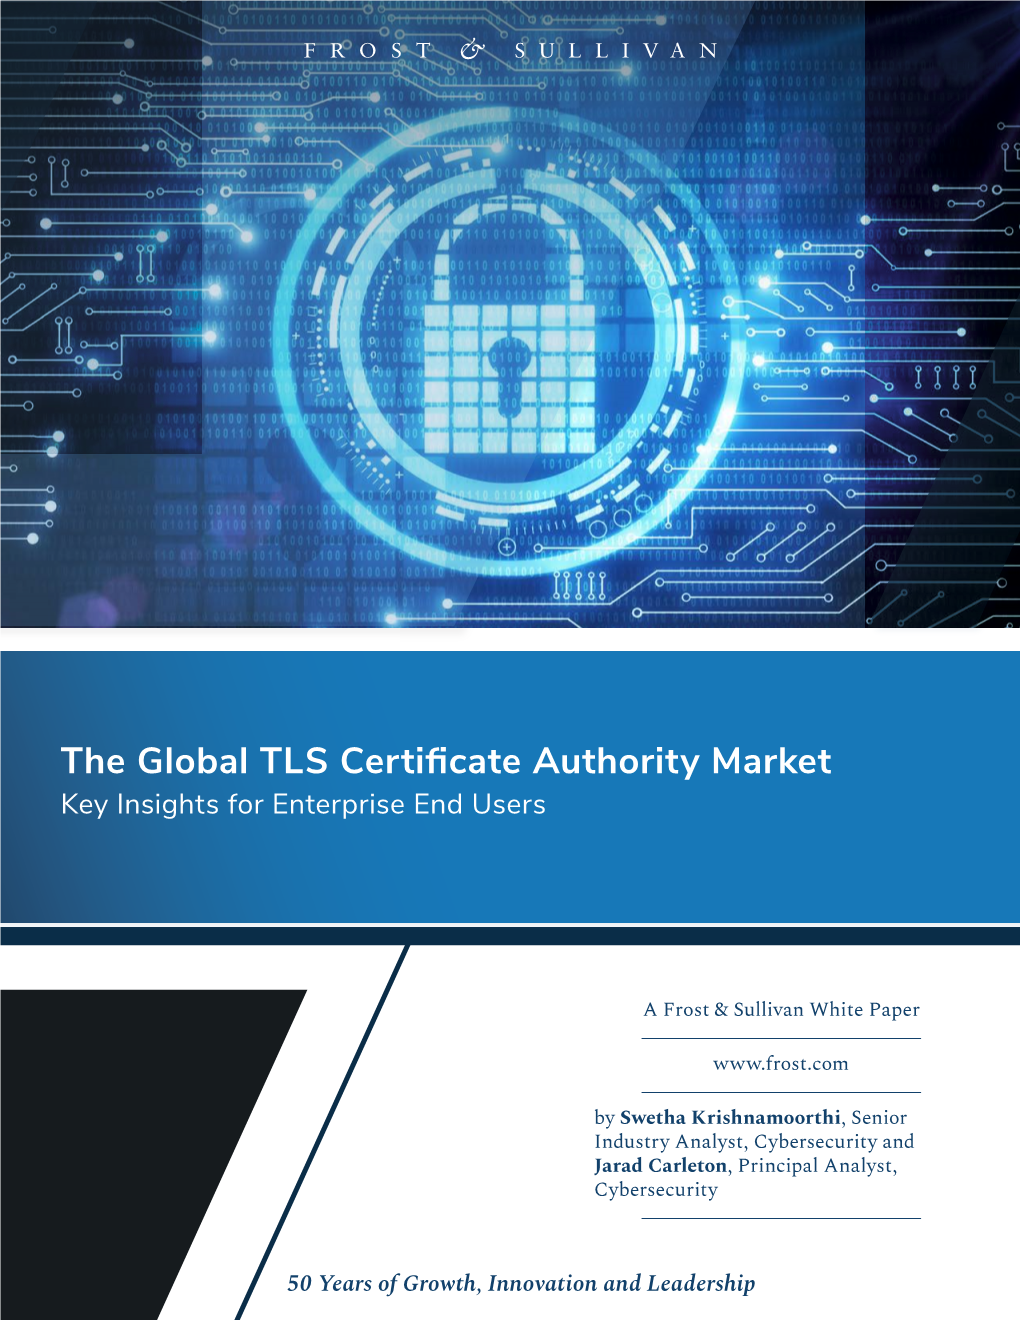 The Global TLS Certificate Authority Market Key Insights for Enterprise End Users